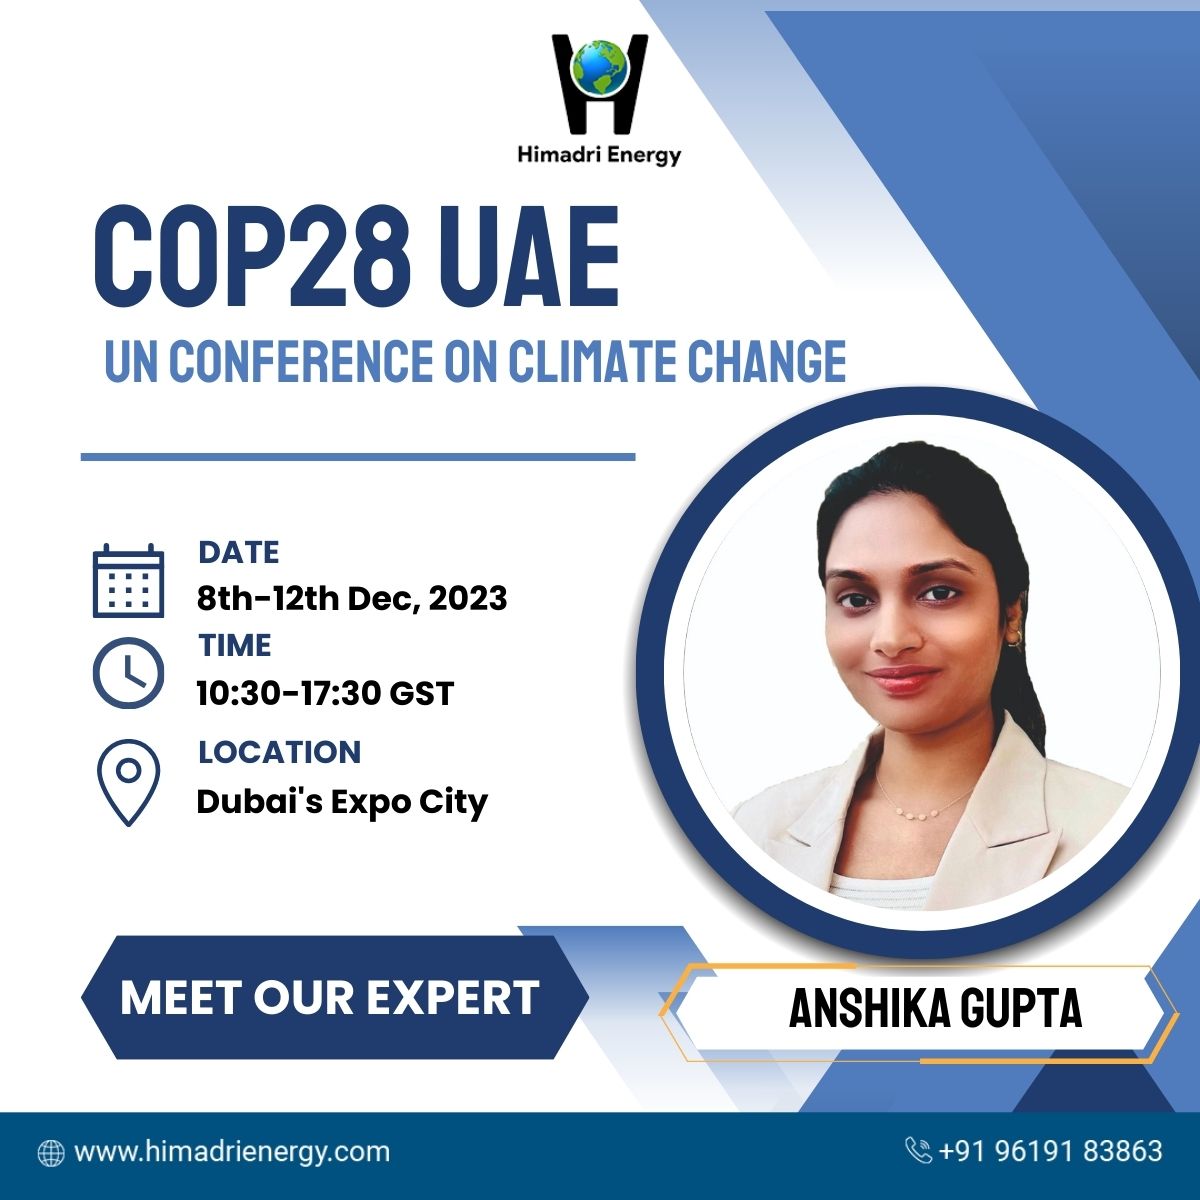 Gearing up for a meaningful presence at #COP28, the UN Climate Change Conference! Stay tuned for insights, updates, & collaborative efforts for a greener planet!

#ClimateAction #CarbonFinance #ITMOs #SustainabilityGoals #SustainabilityJourney #GlobalImpact #UNClimateConference